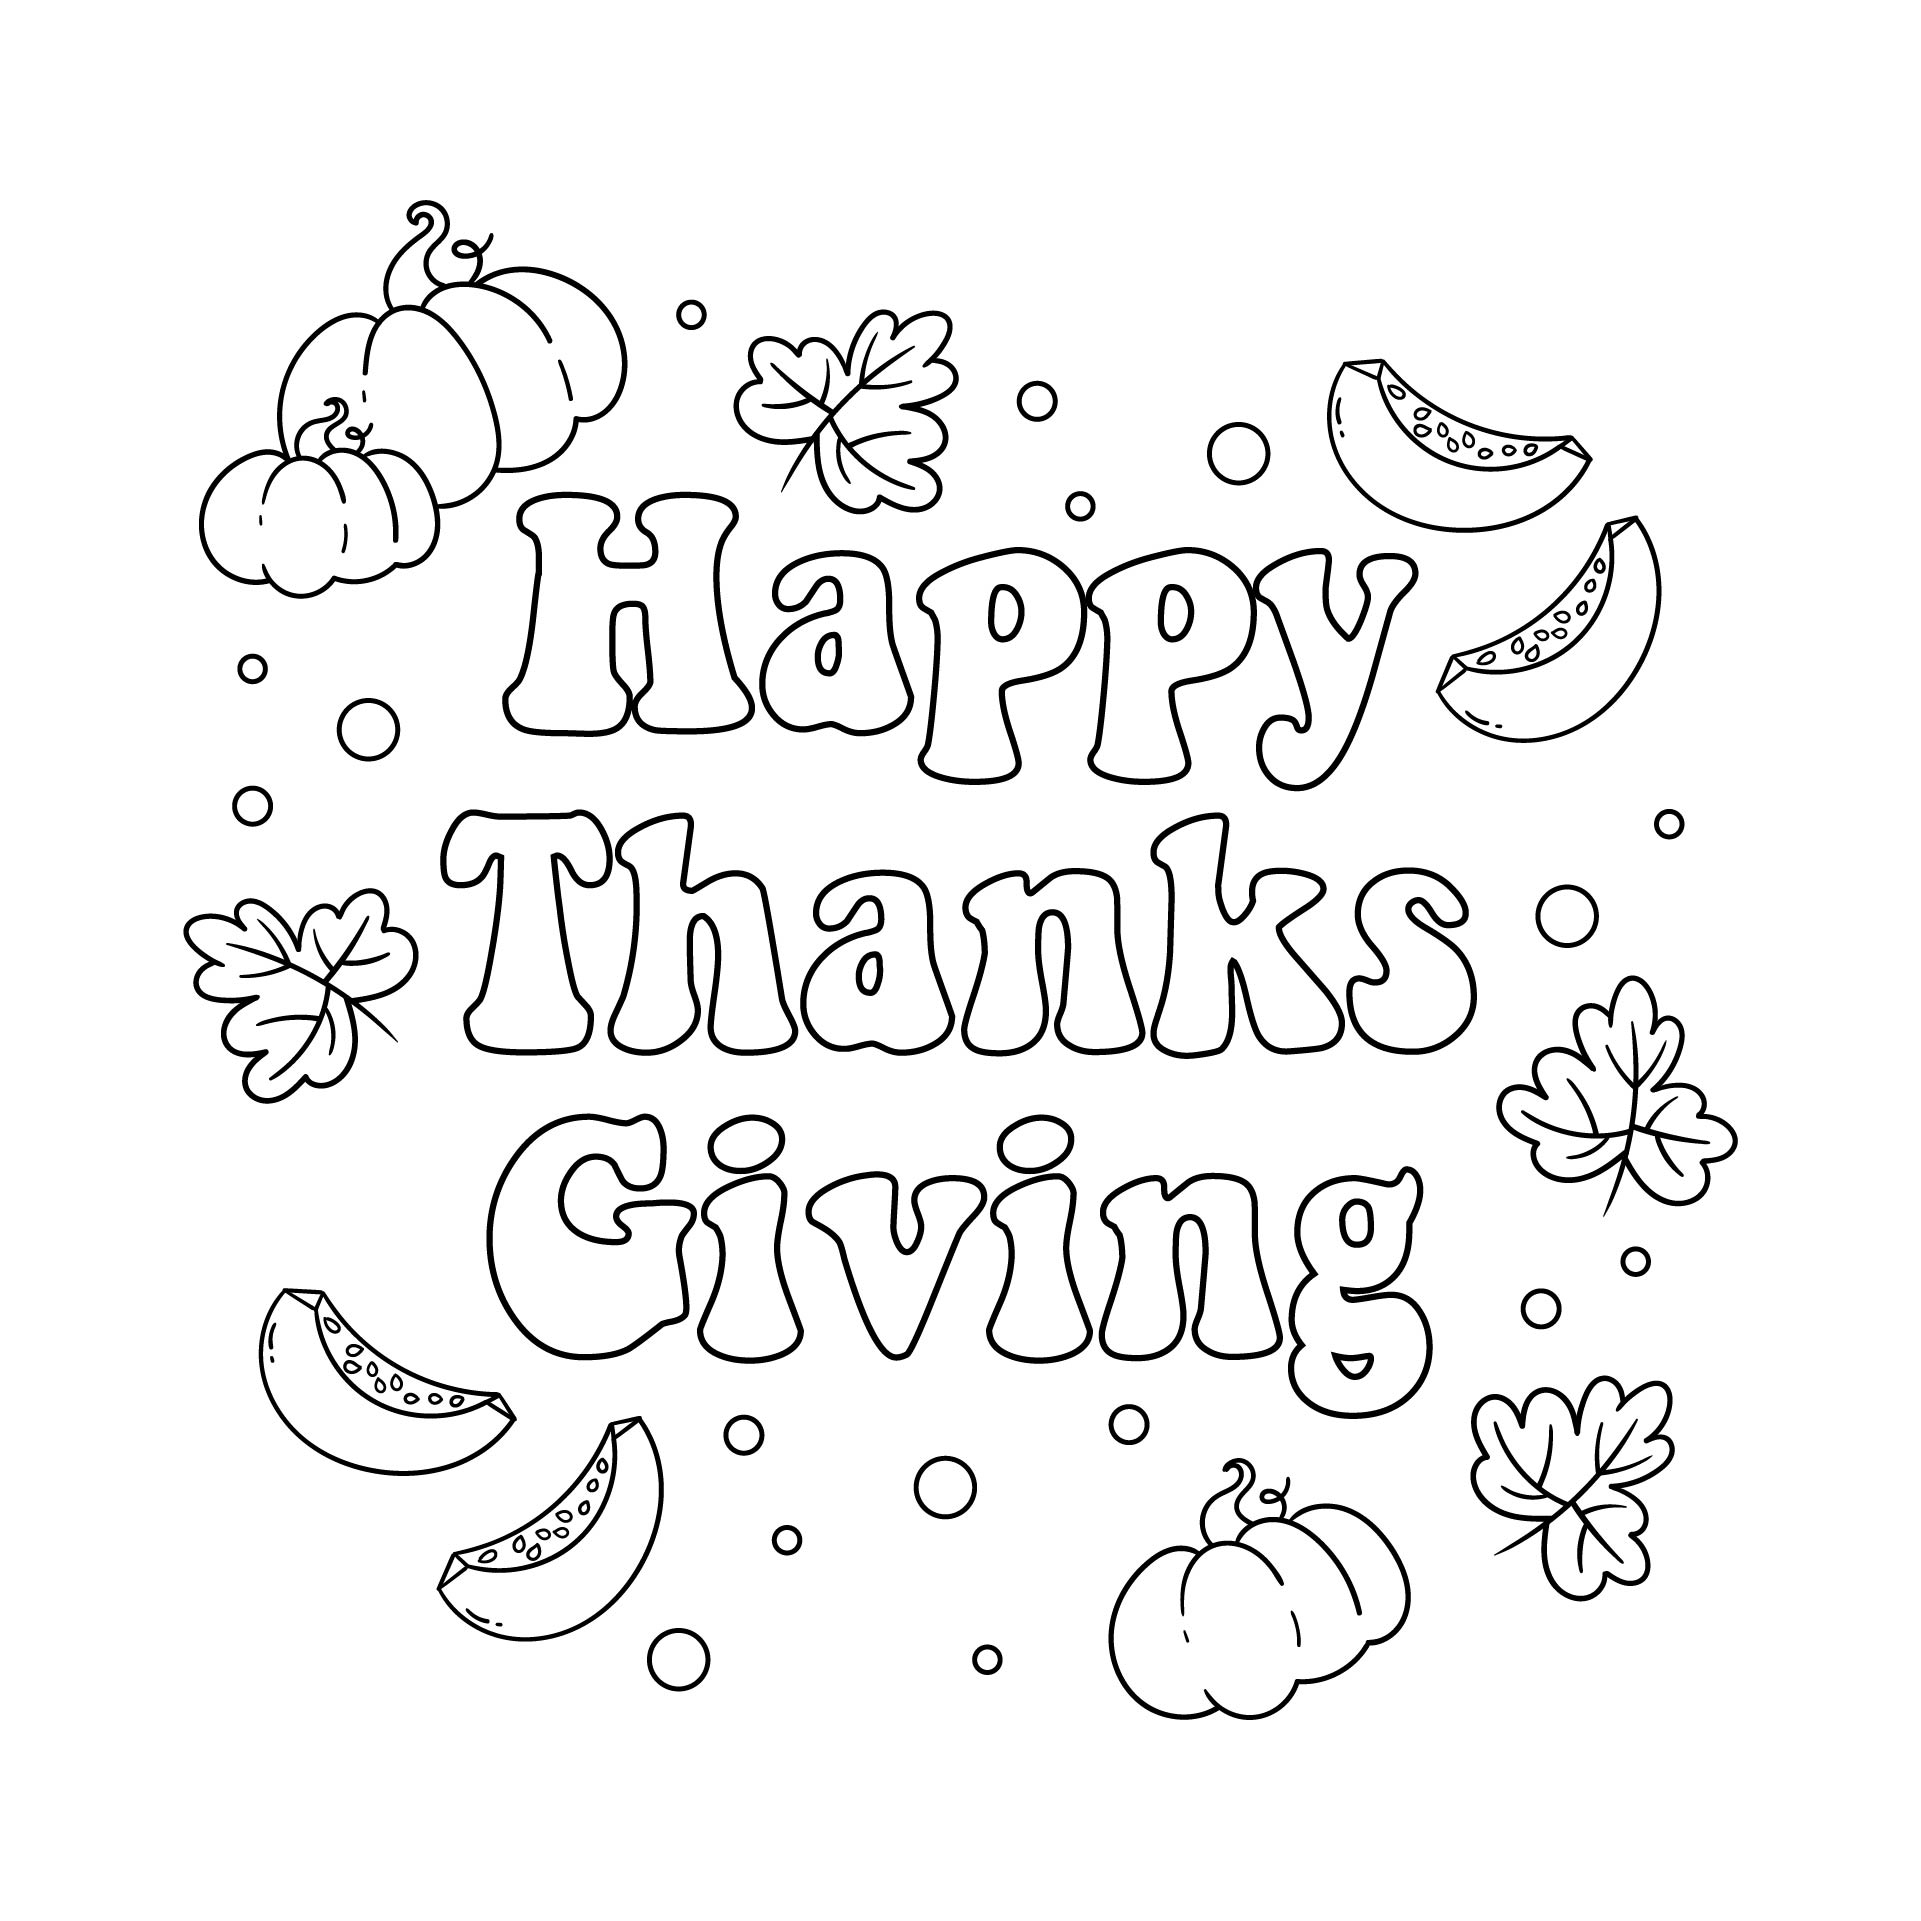 4-best-images-of-happy-thanksgiving-printable-letters-happy